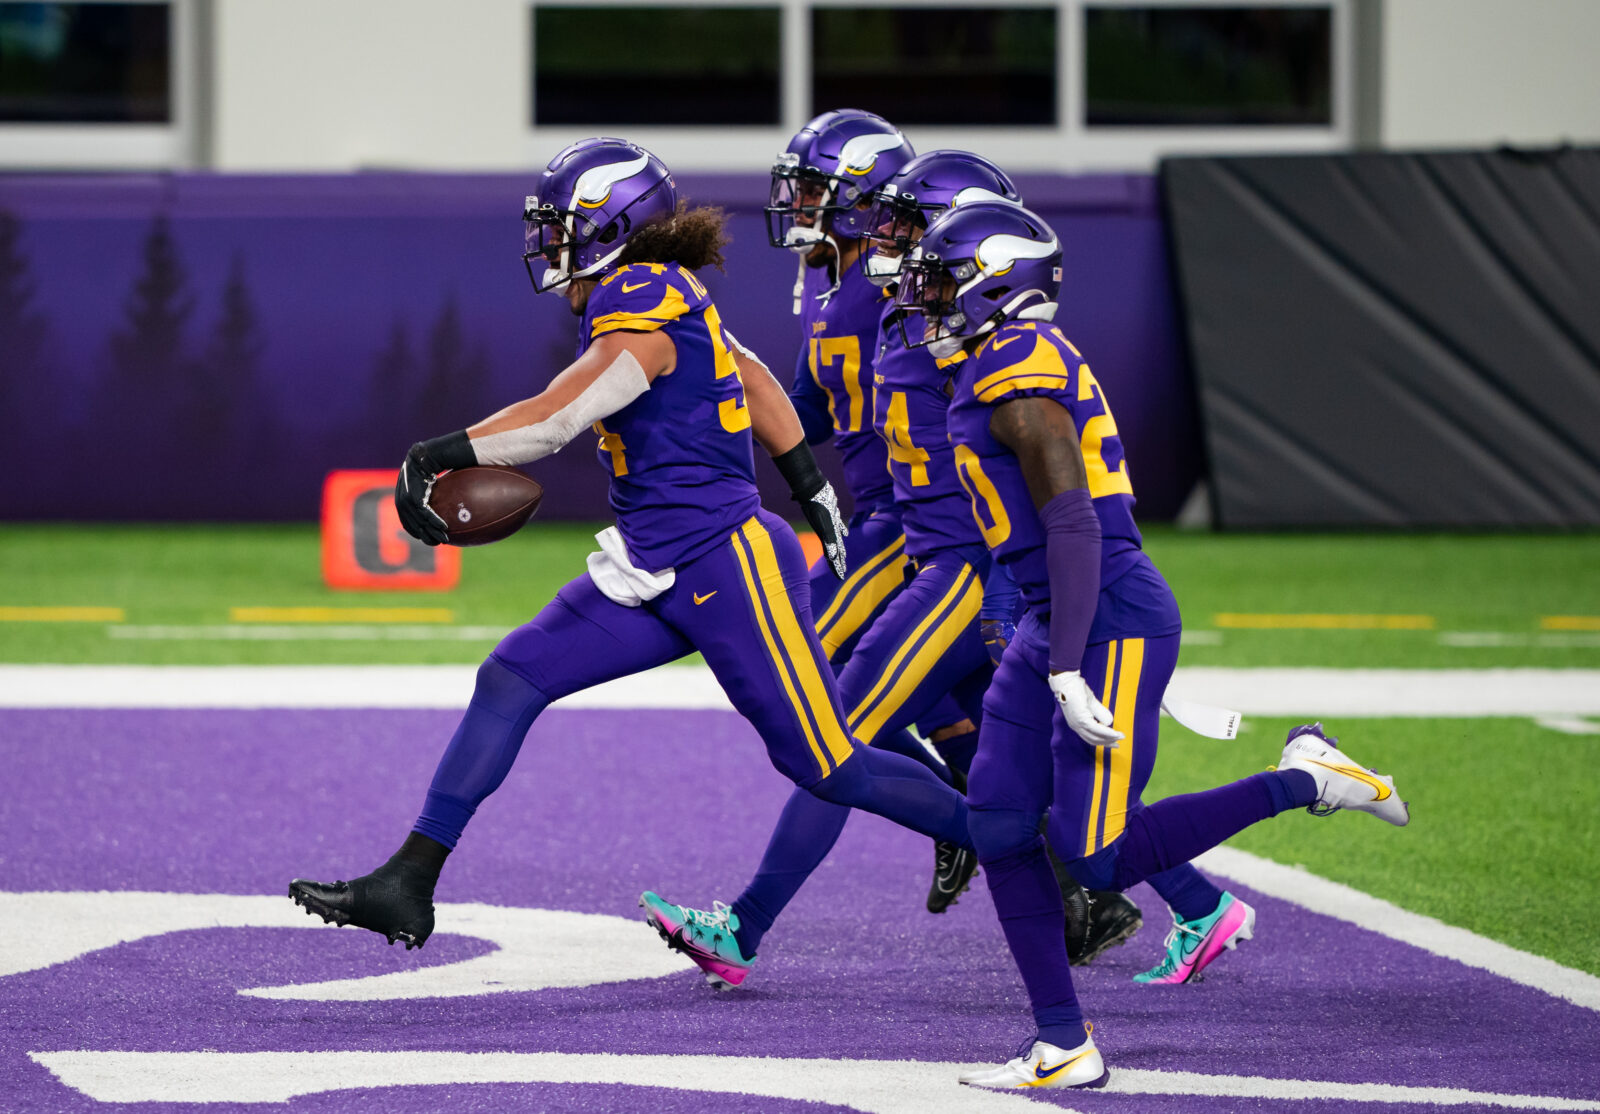 Is it time for the Minnesota Vikings to change their uniforms?